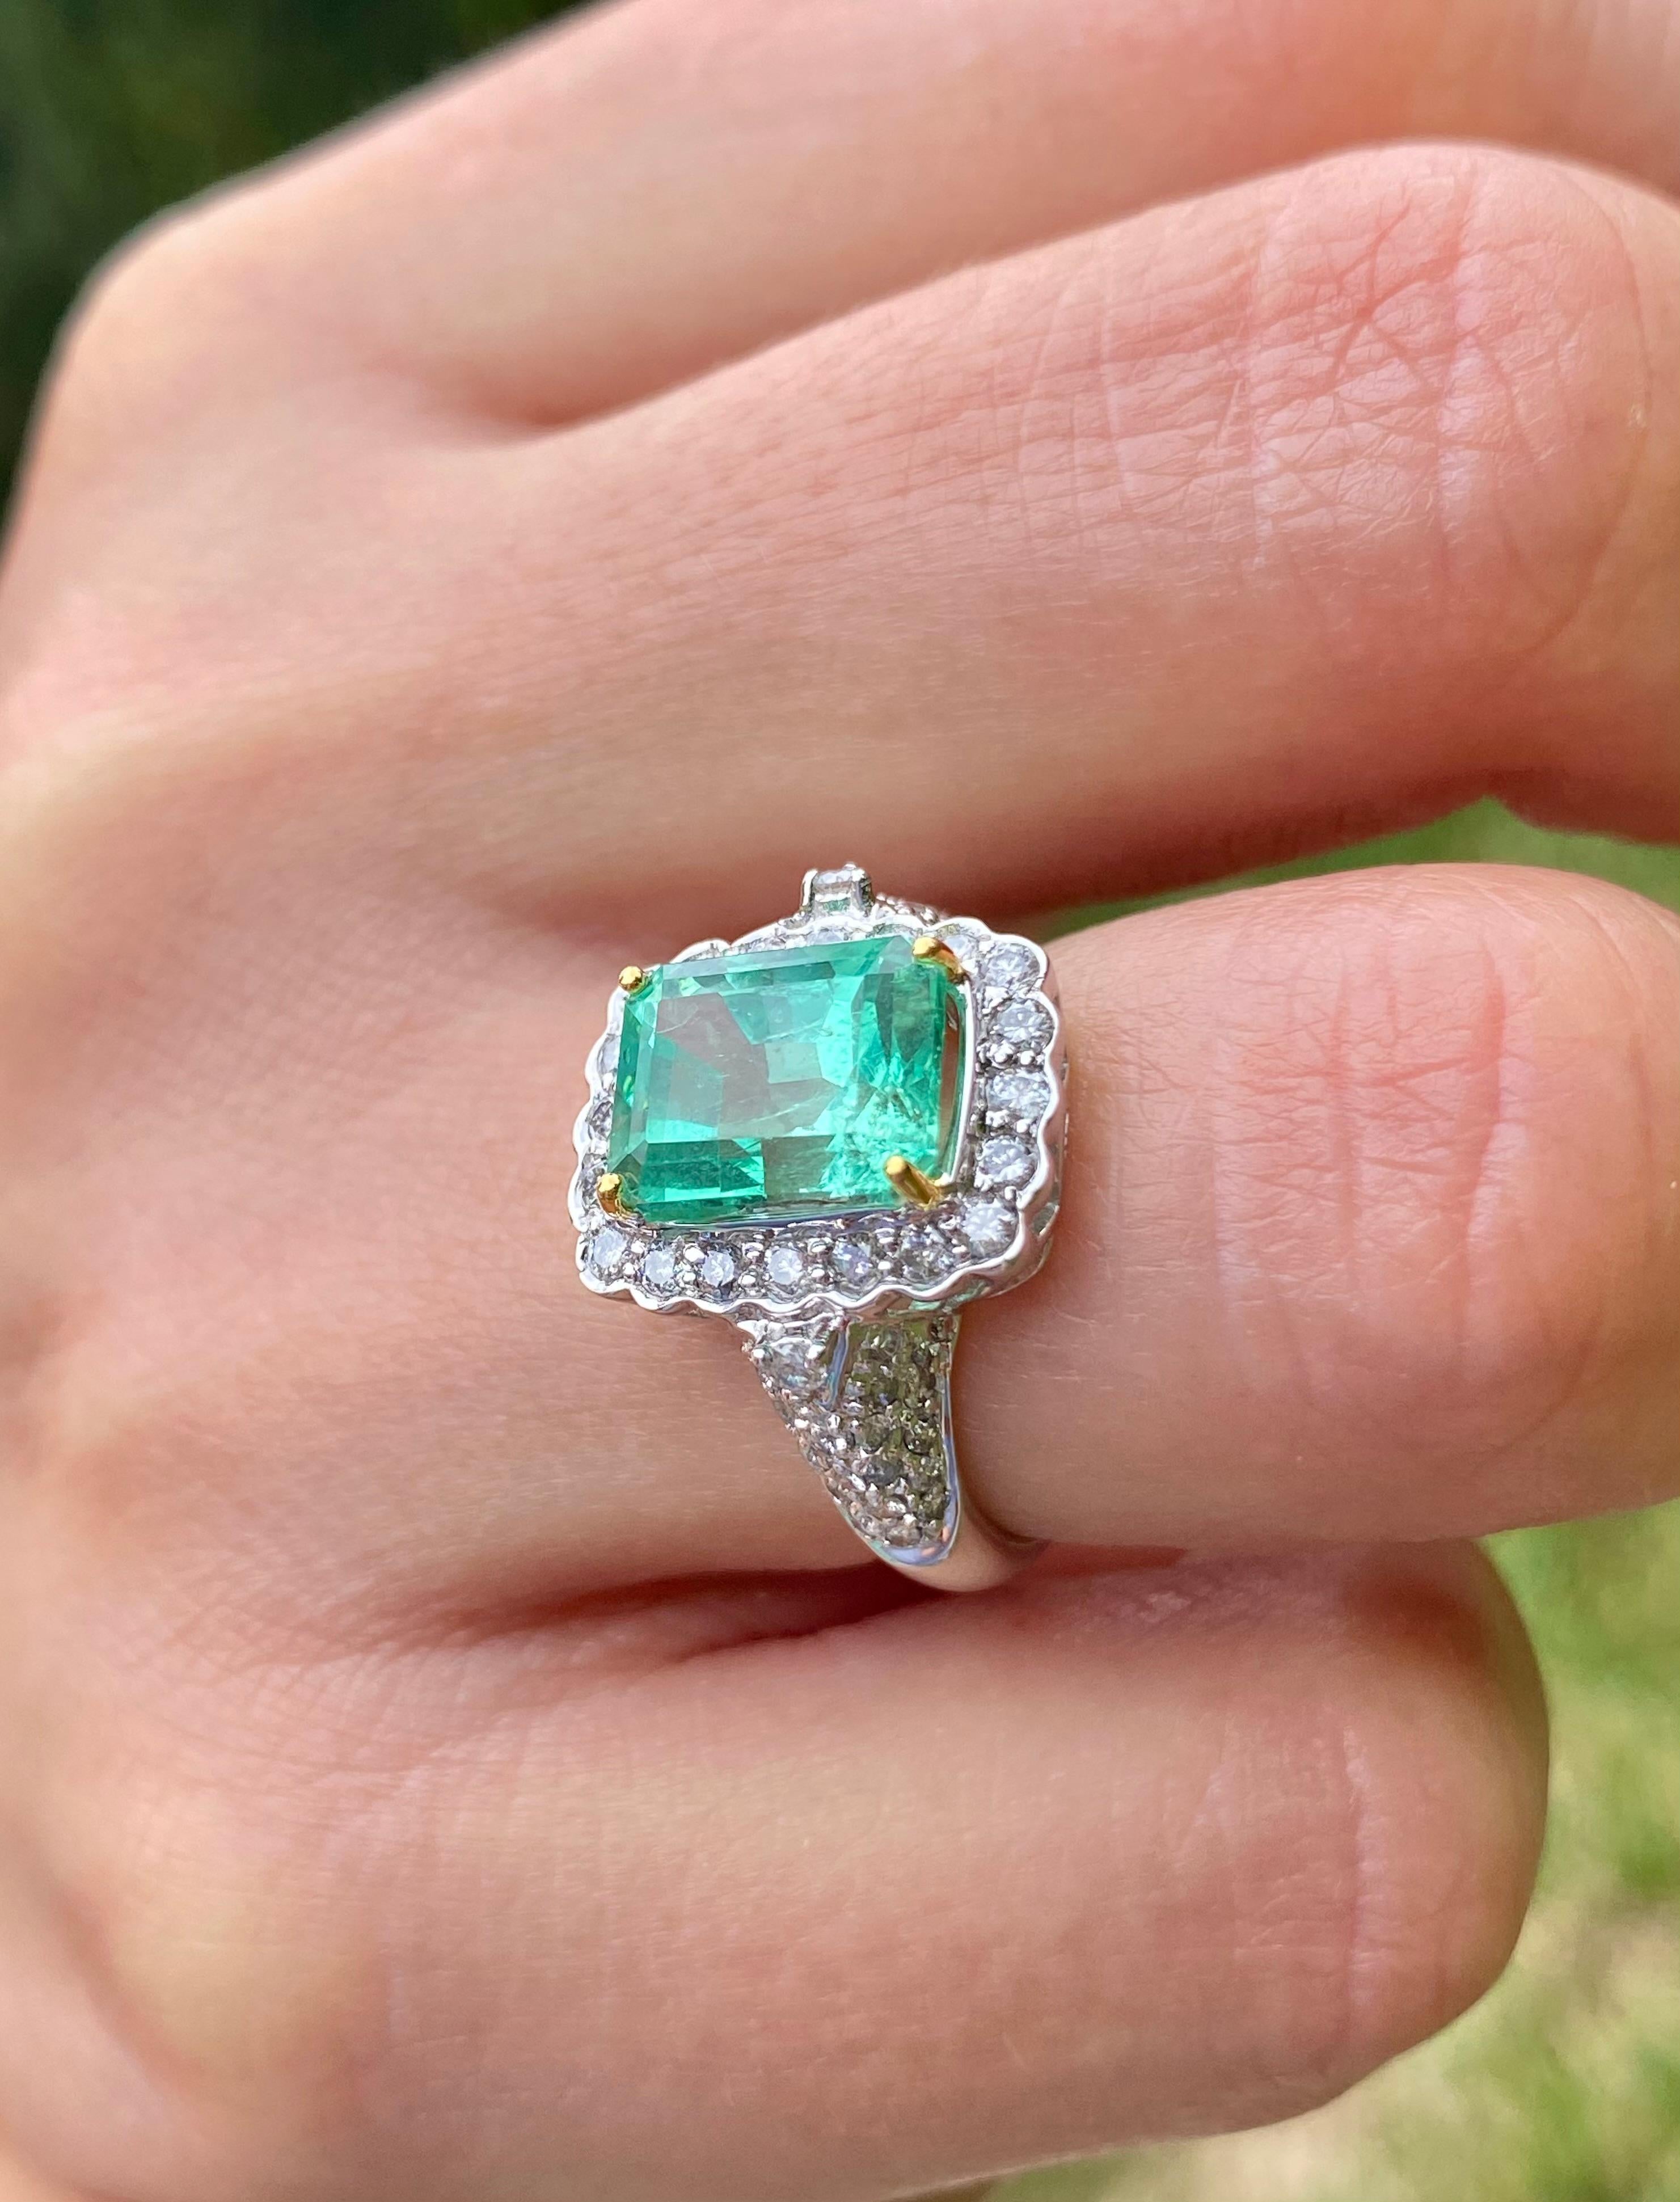 3.58 Carat Emerald-Cut Colombian Emerald in 18 Karat White Gold Ring For Sale 4